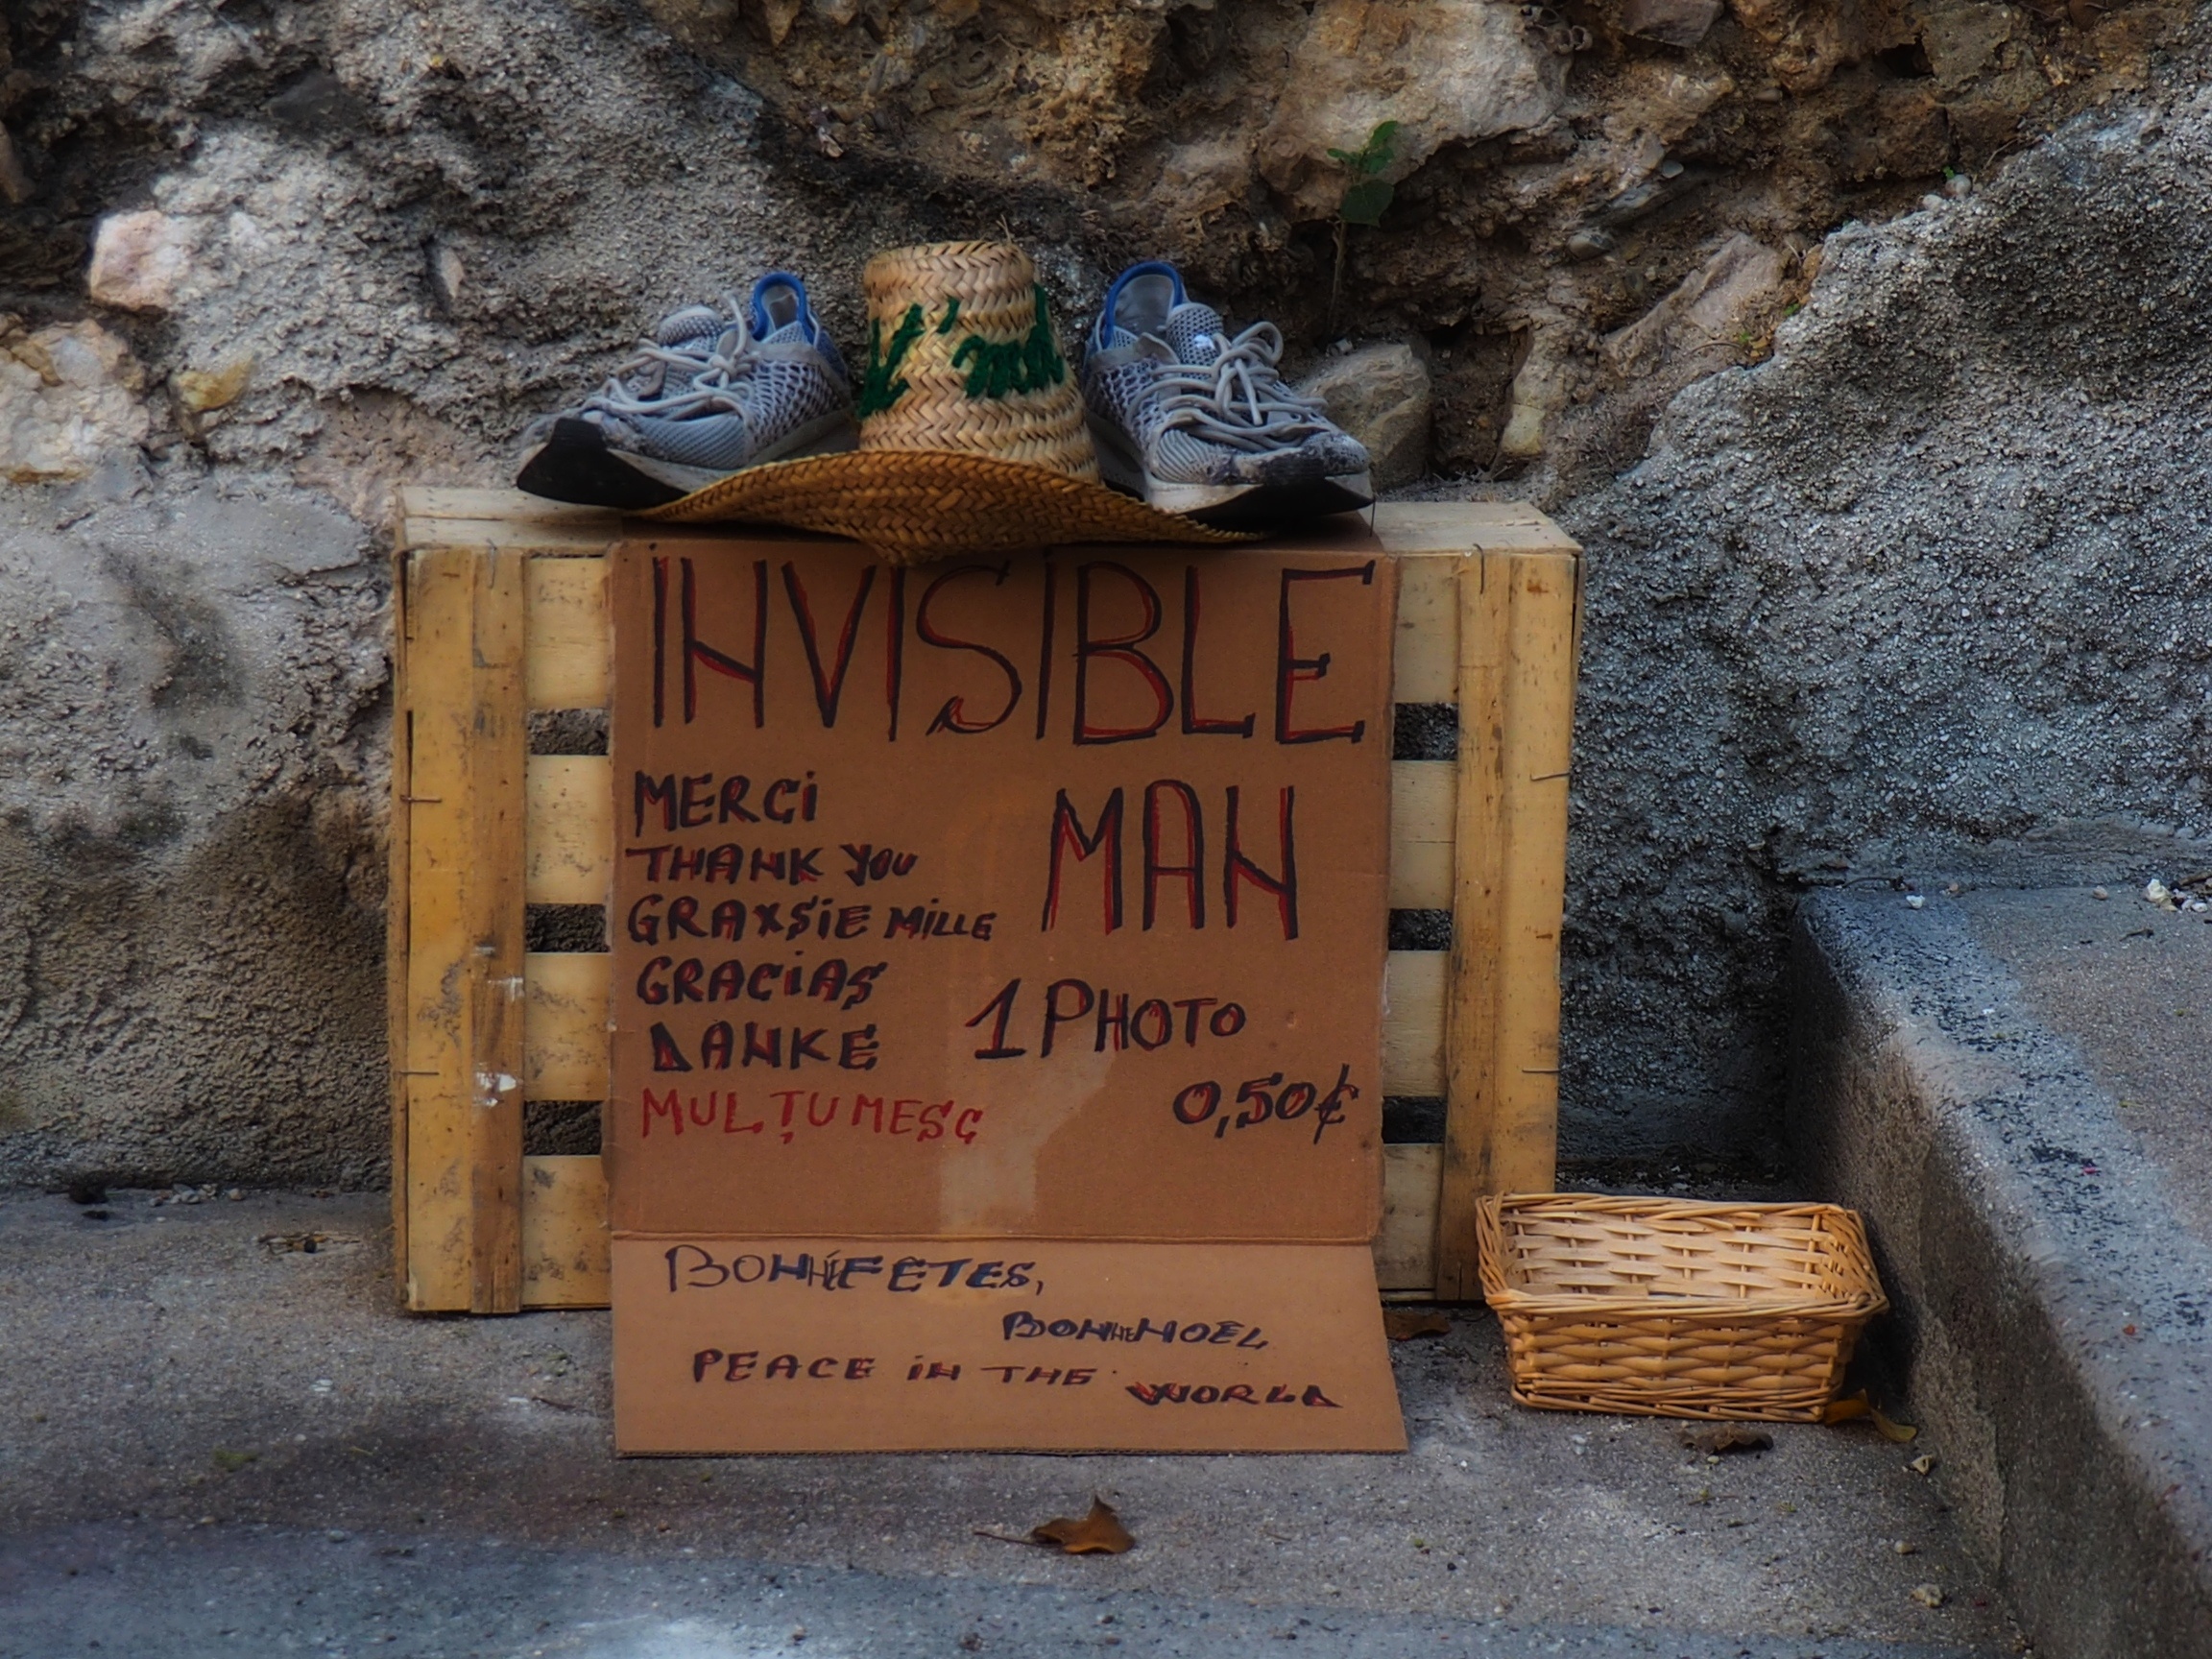 The Invisible Man...